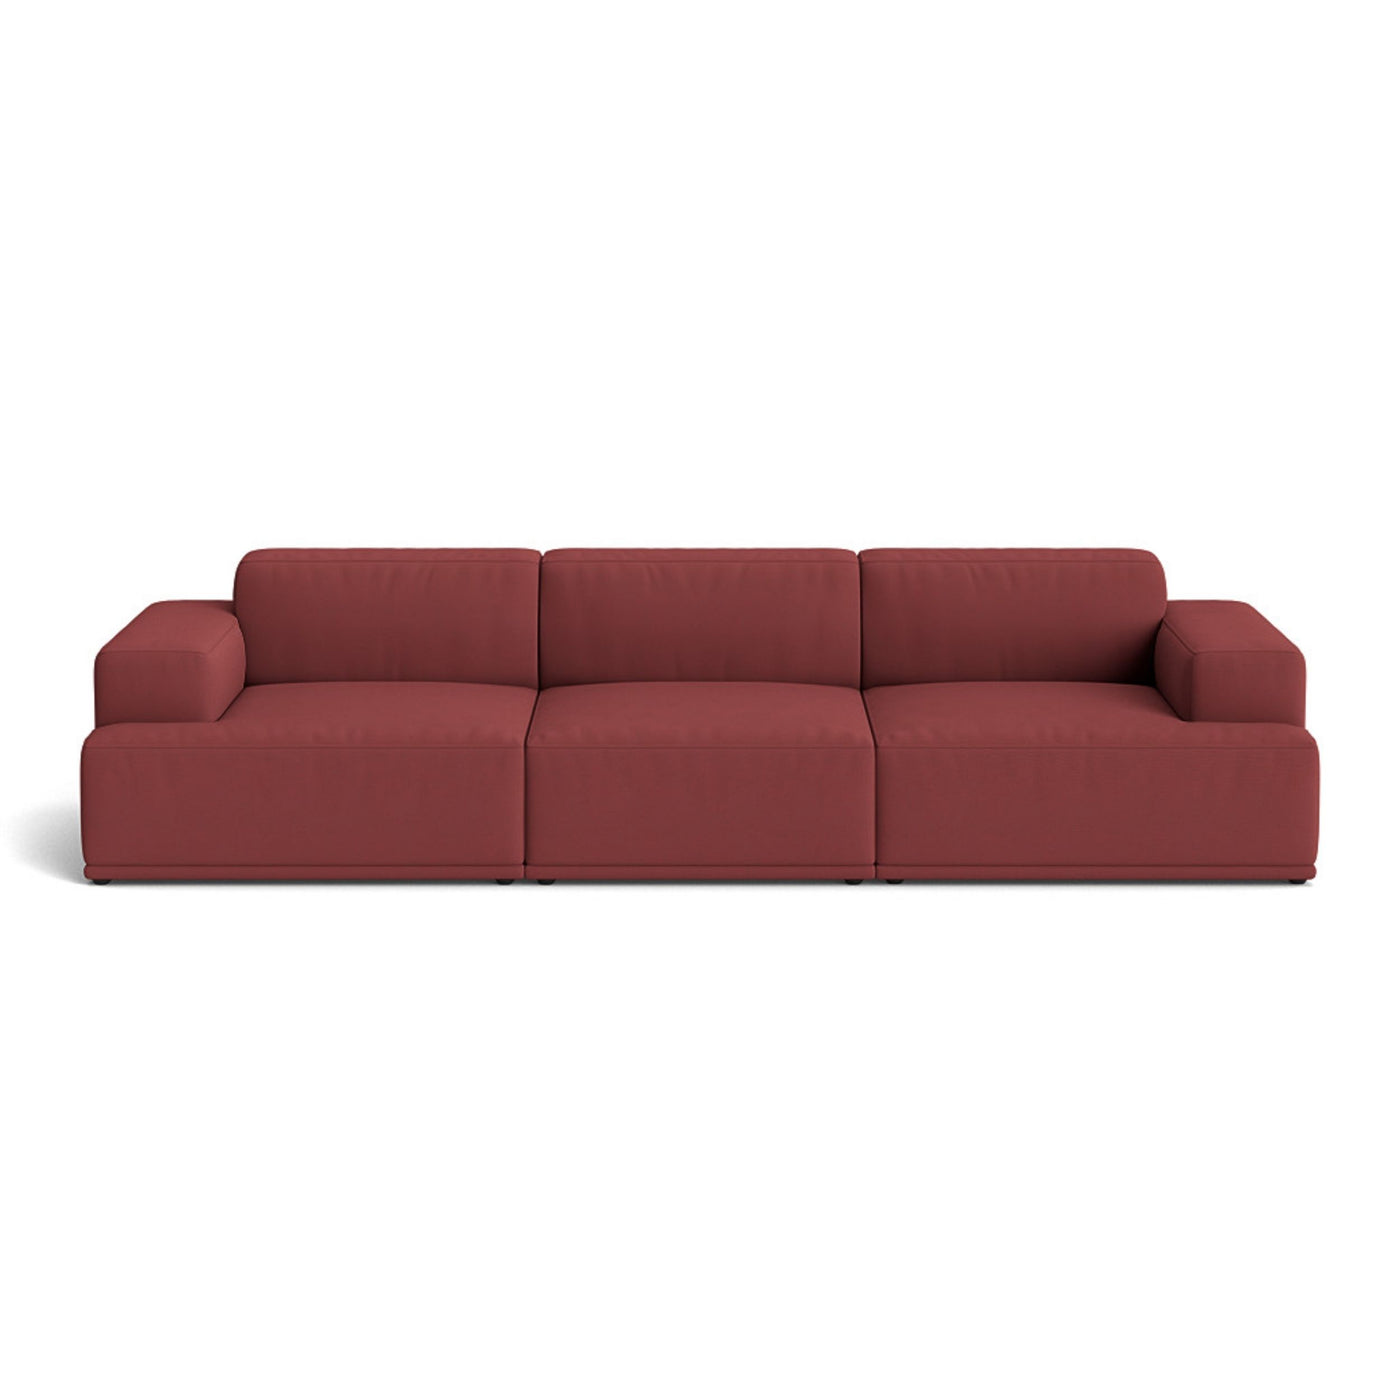 Muuto Connect Soft Modular 3 Seater Sofa, configuration 1. Made-to-order from someday designs. #colour_rime-591